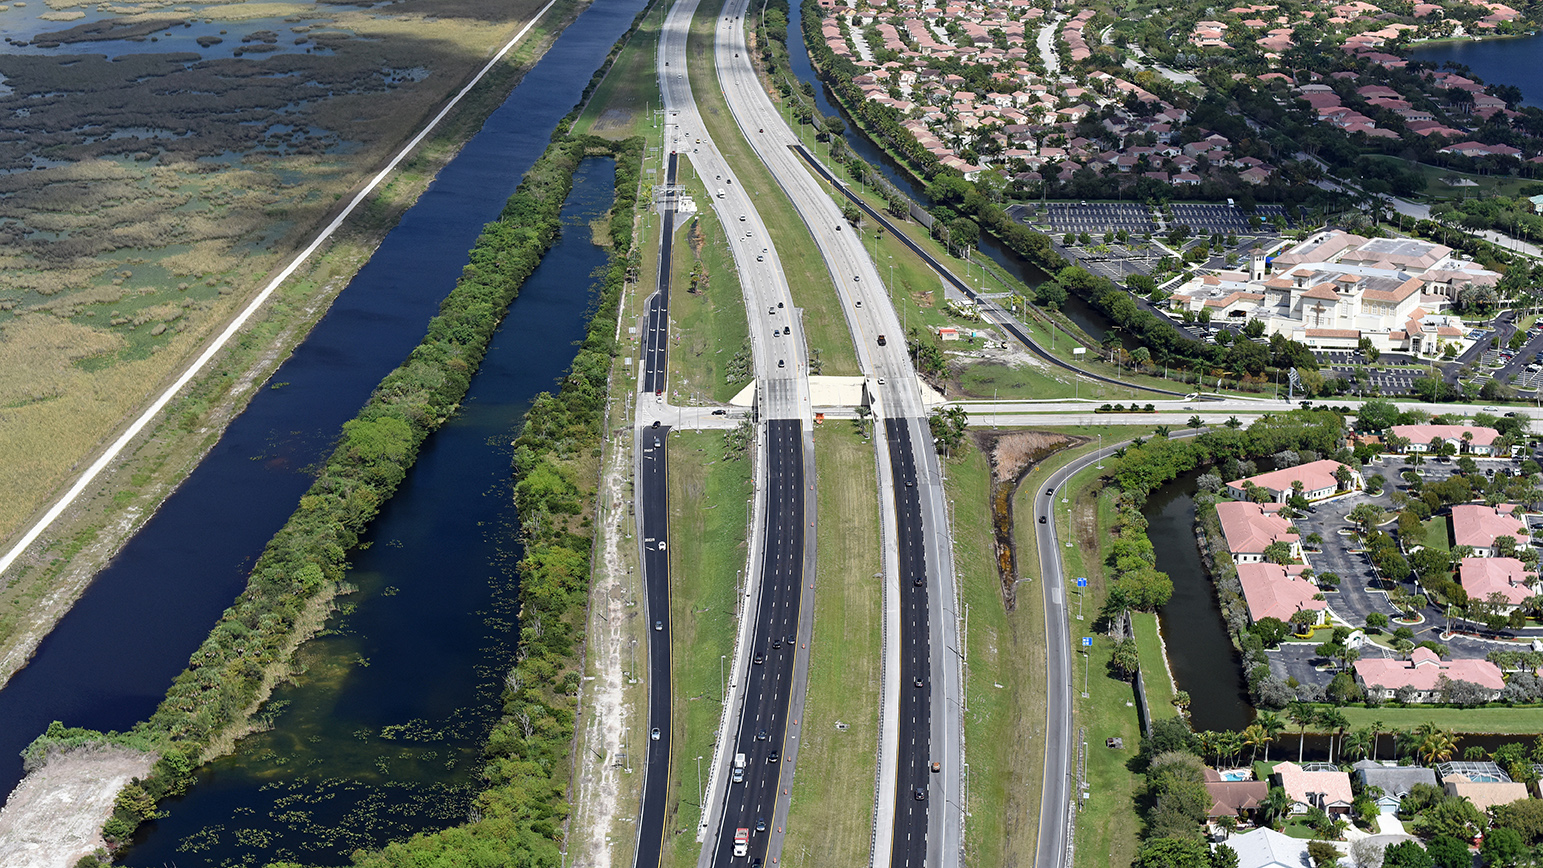 Public Meetings Held for Atlantic Blvd Interchange Improvements at the Sawgrass Expressway